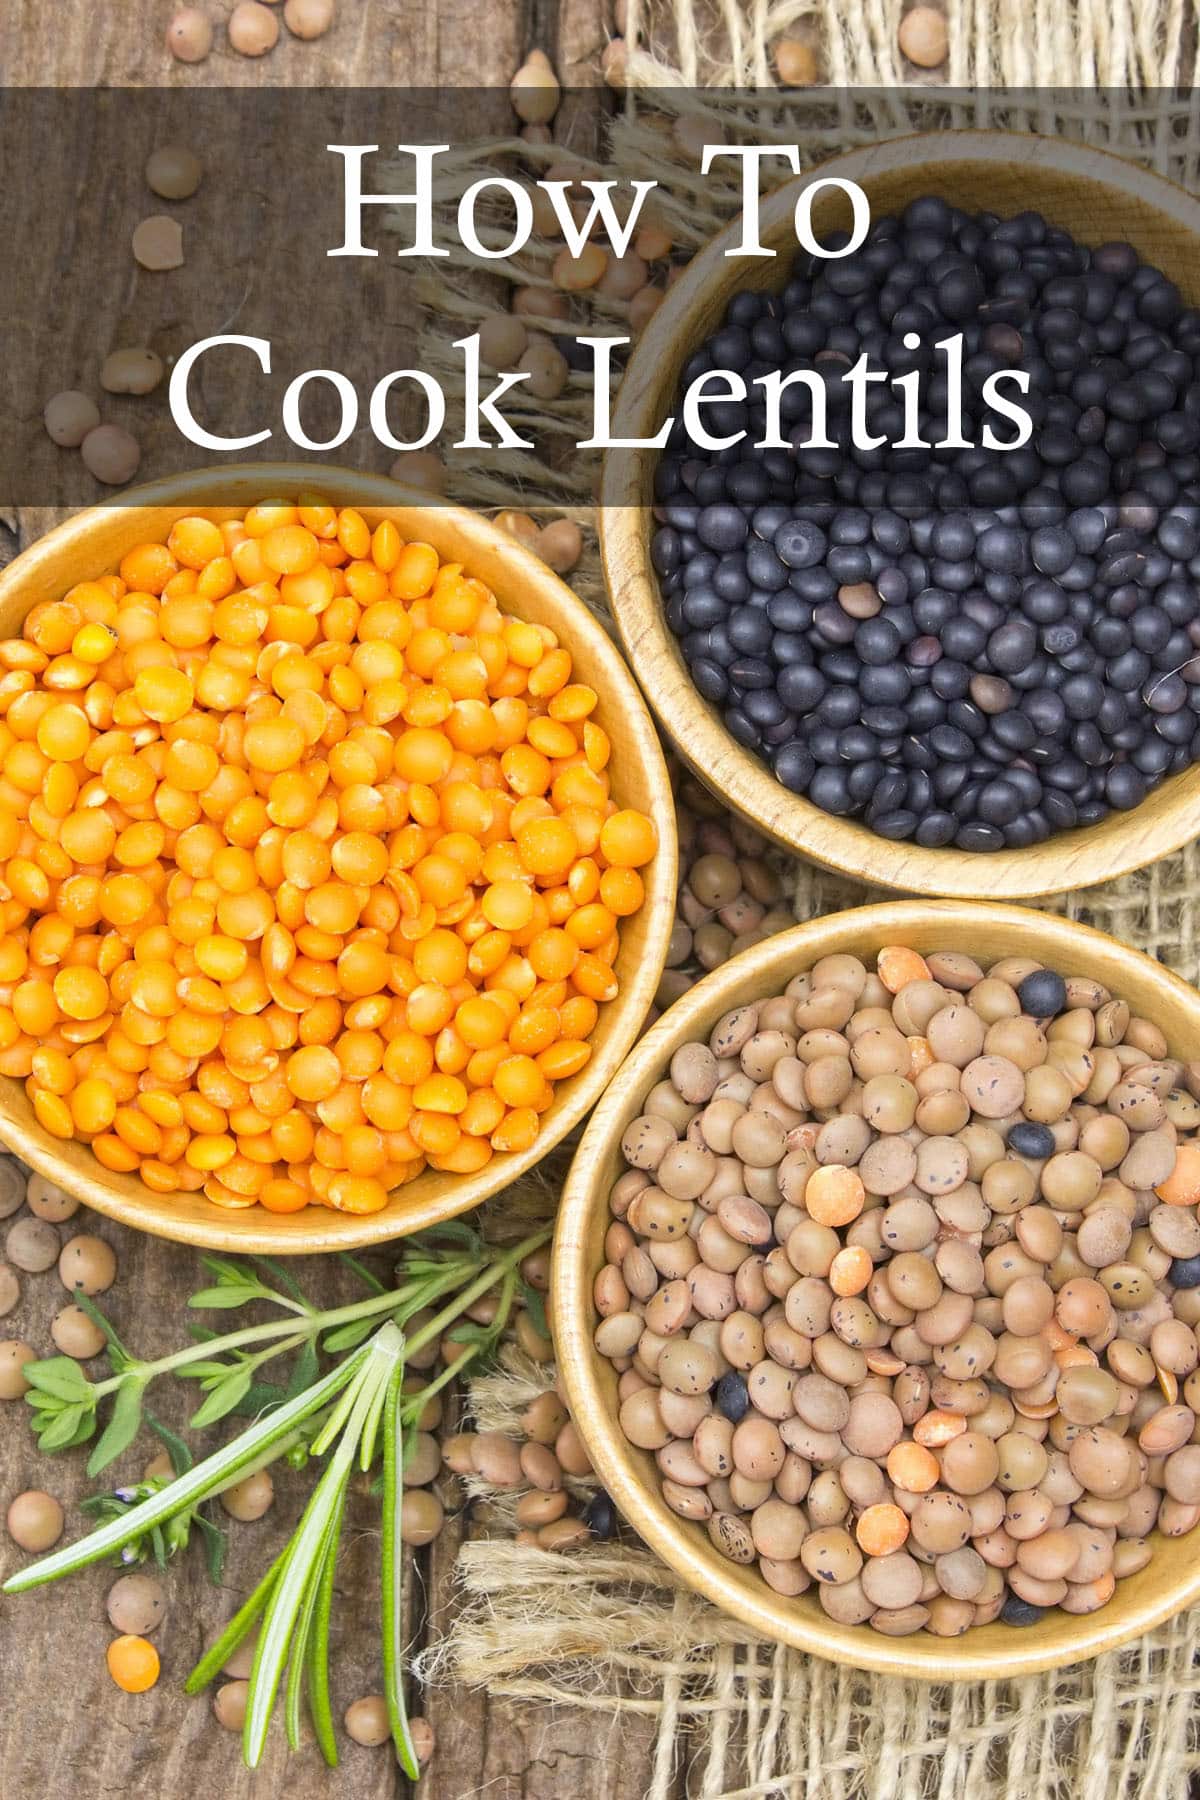 How To Cook Lentils